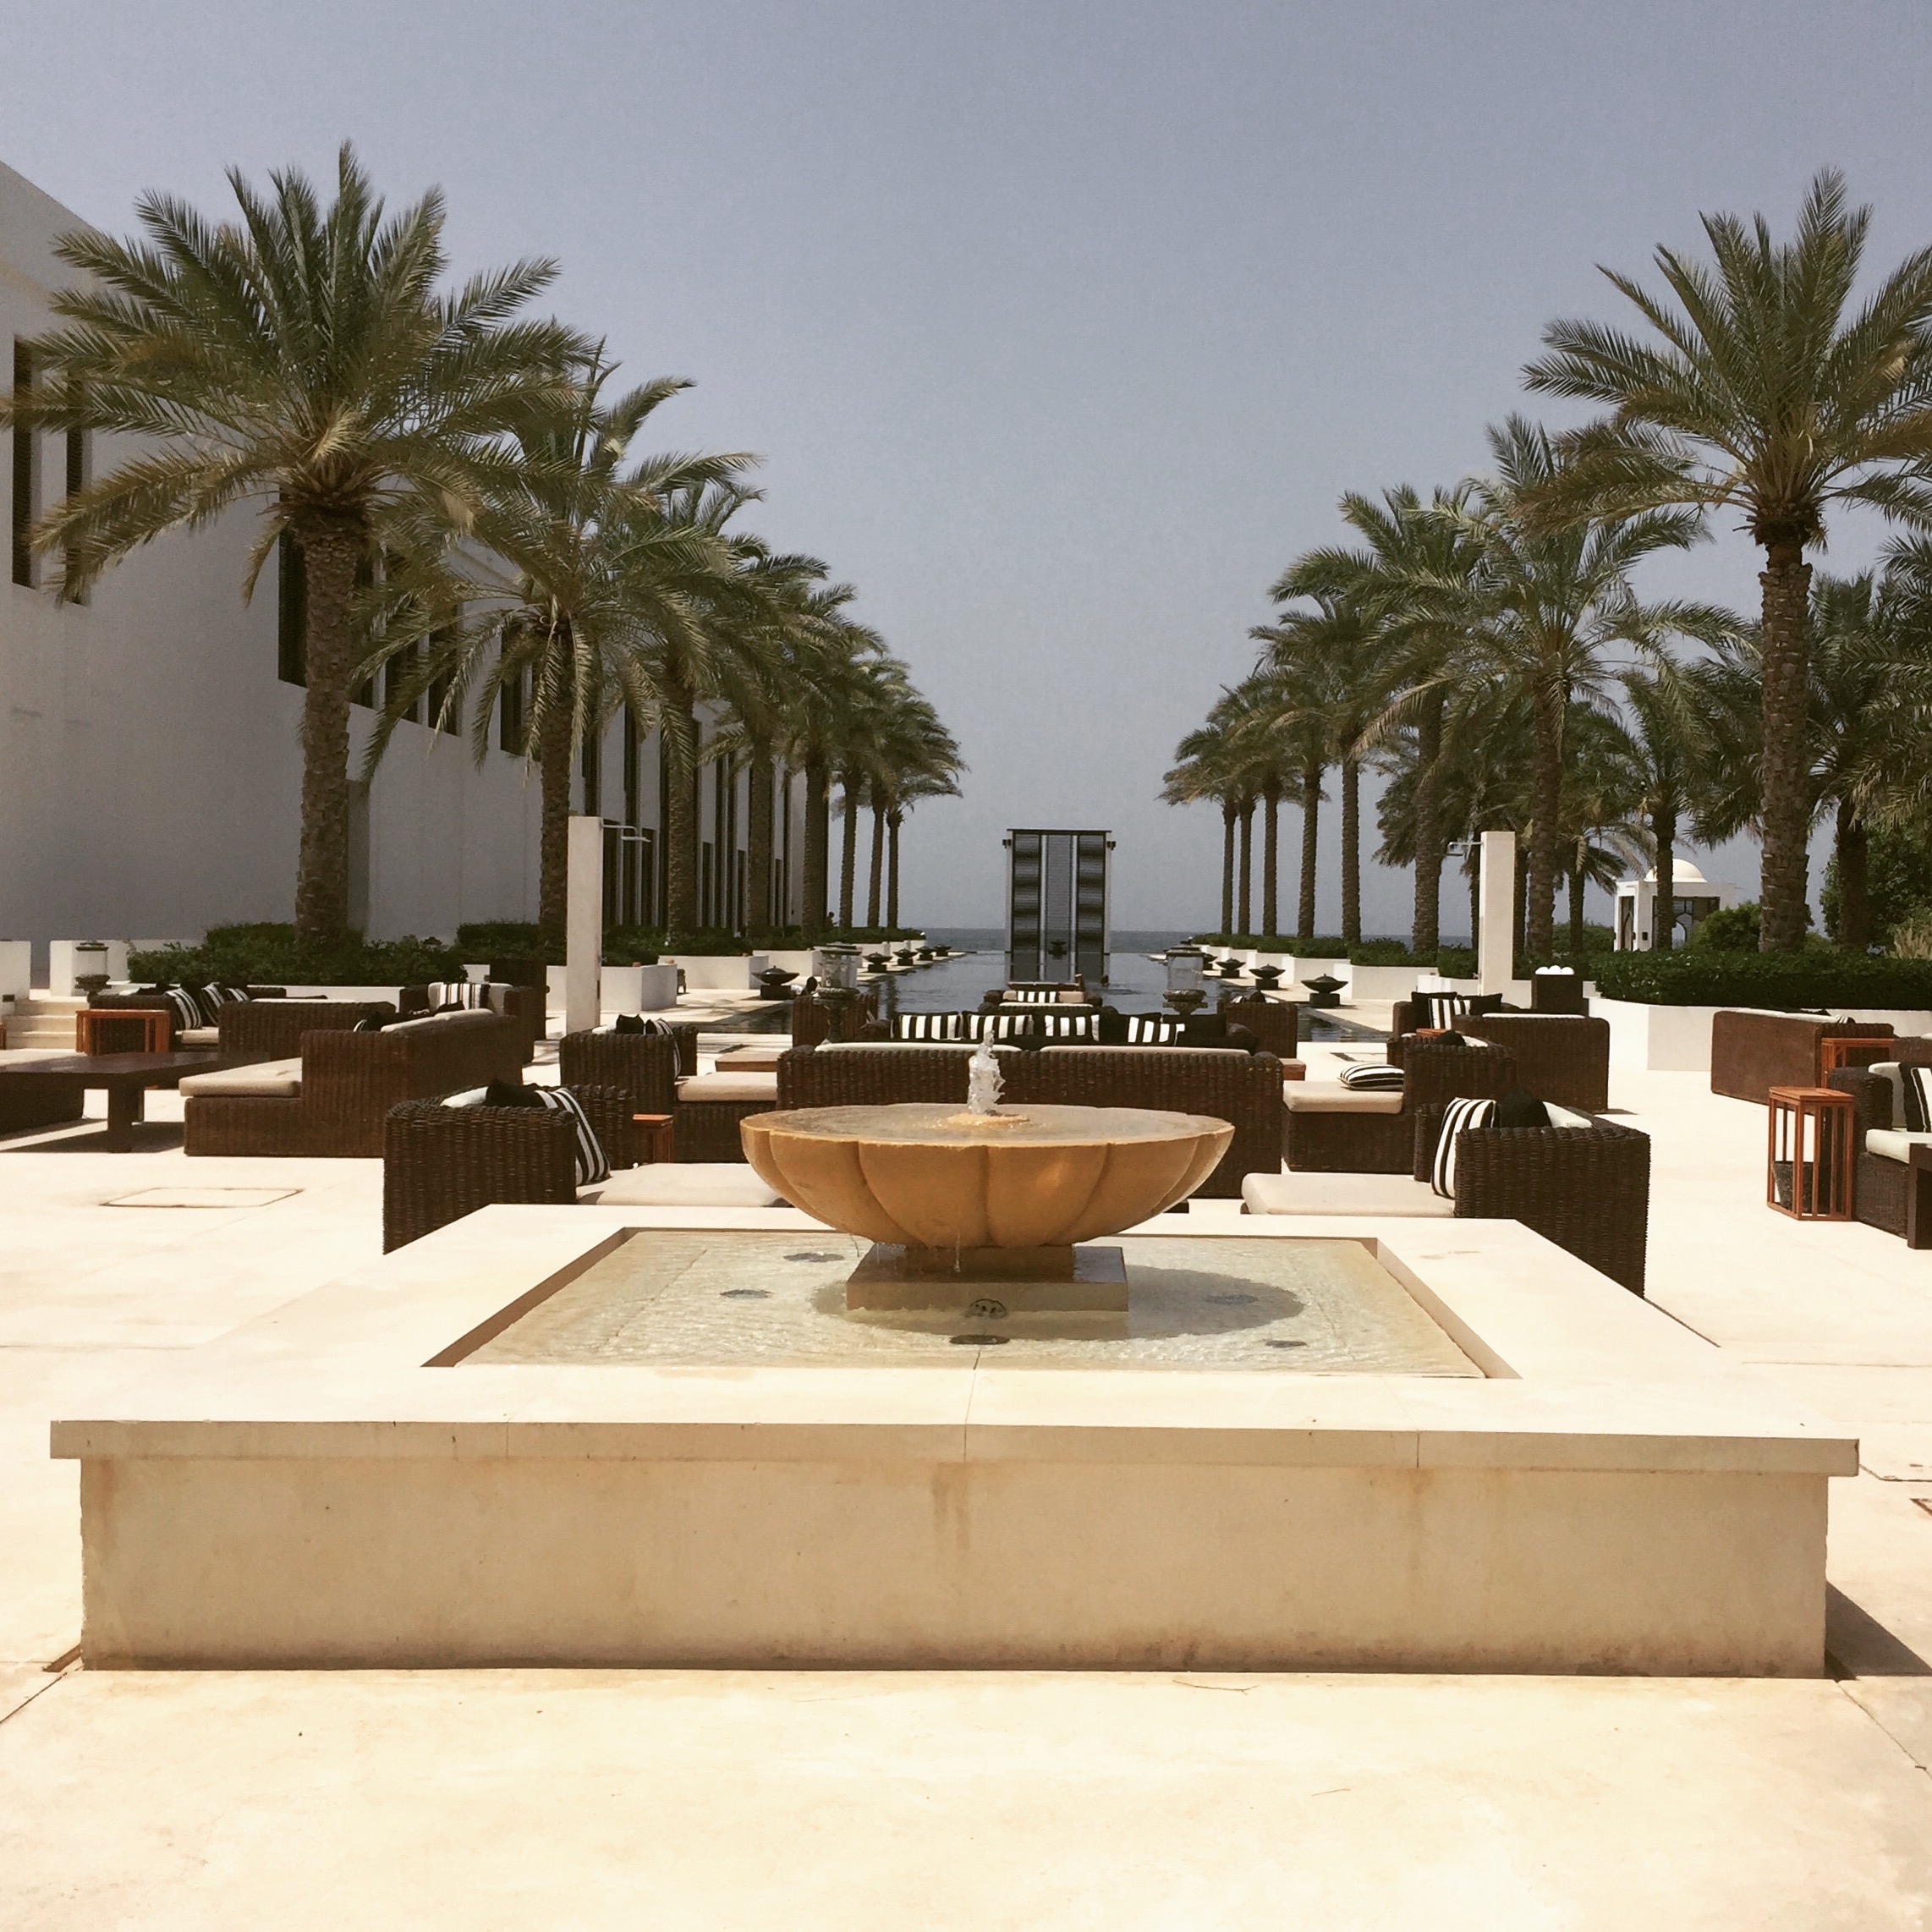 The 103m Pool, The Chedi, Muscat, Oman